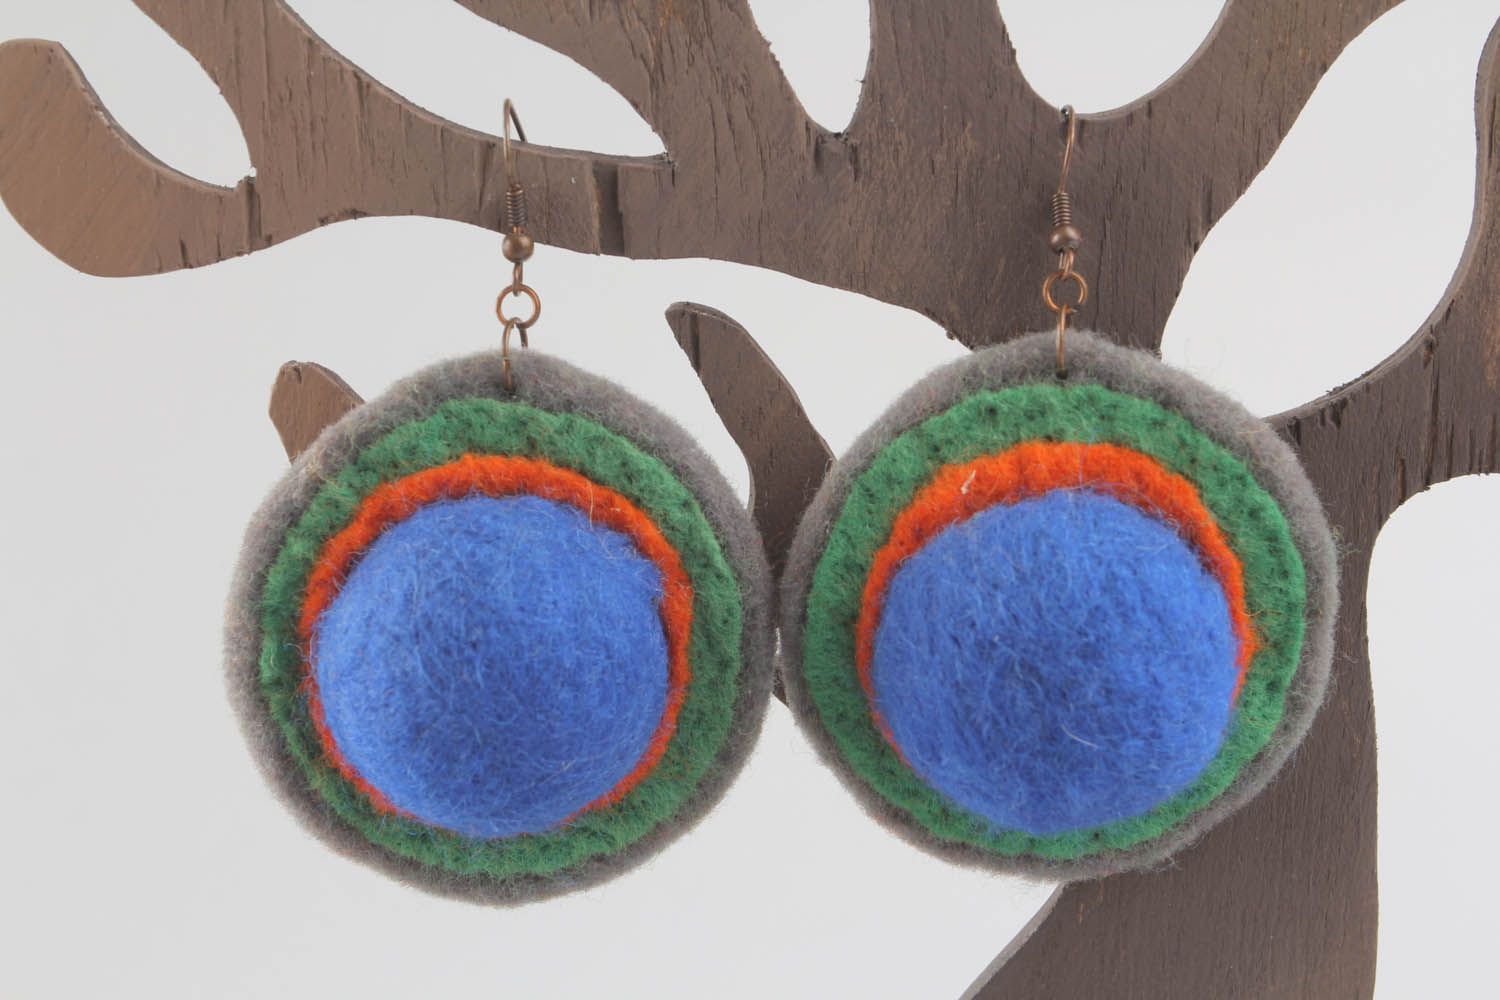 Round earrings made of wool and felt using felting technique photo 1